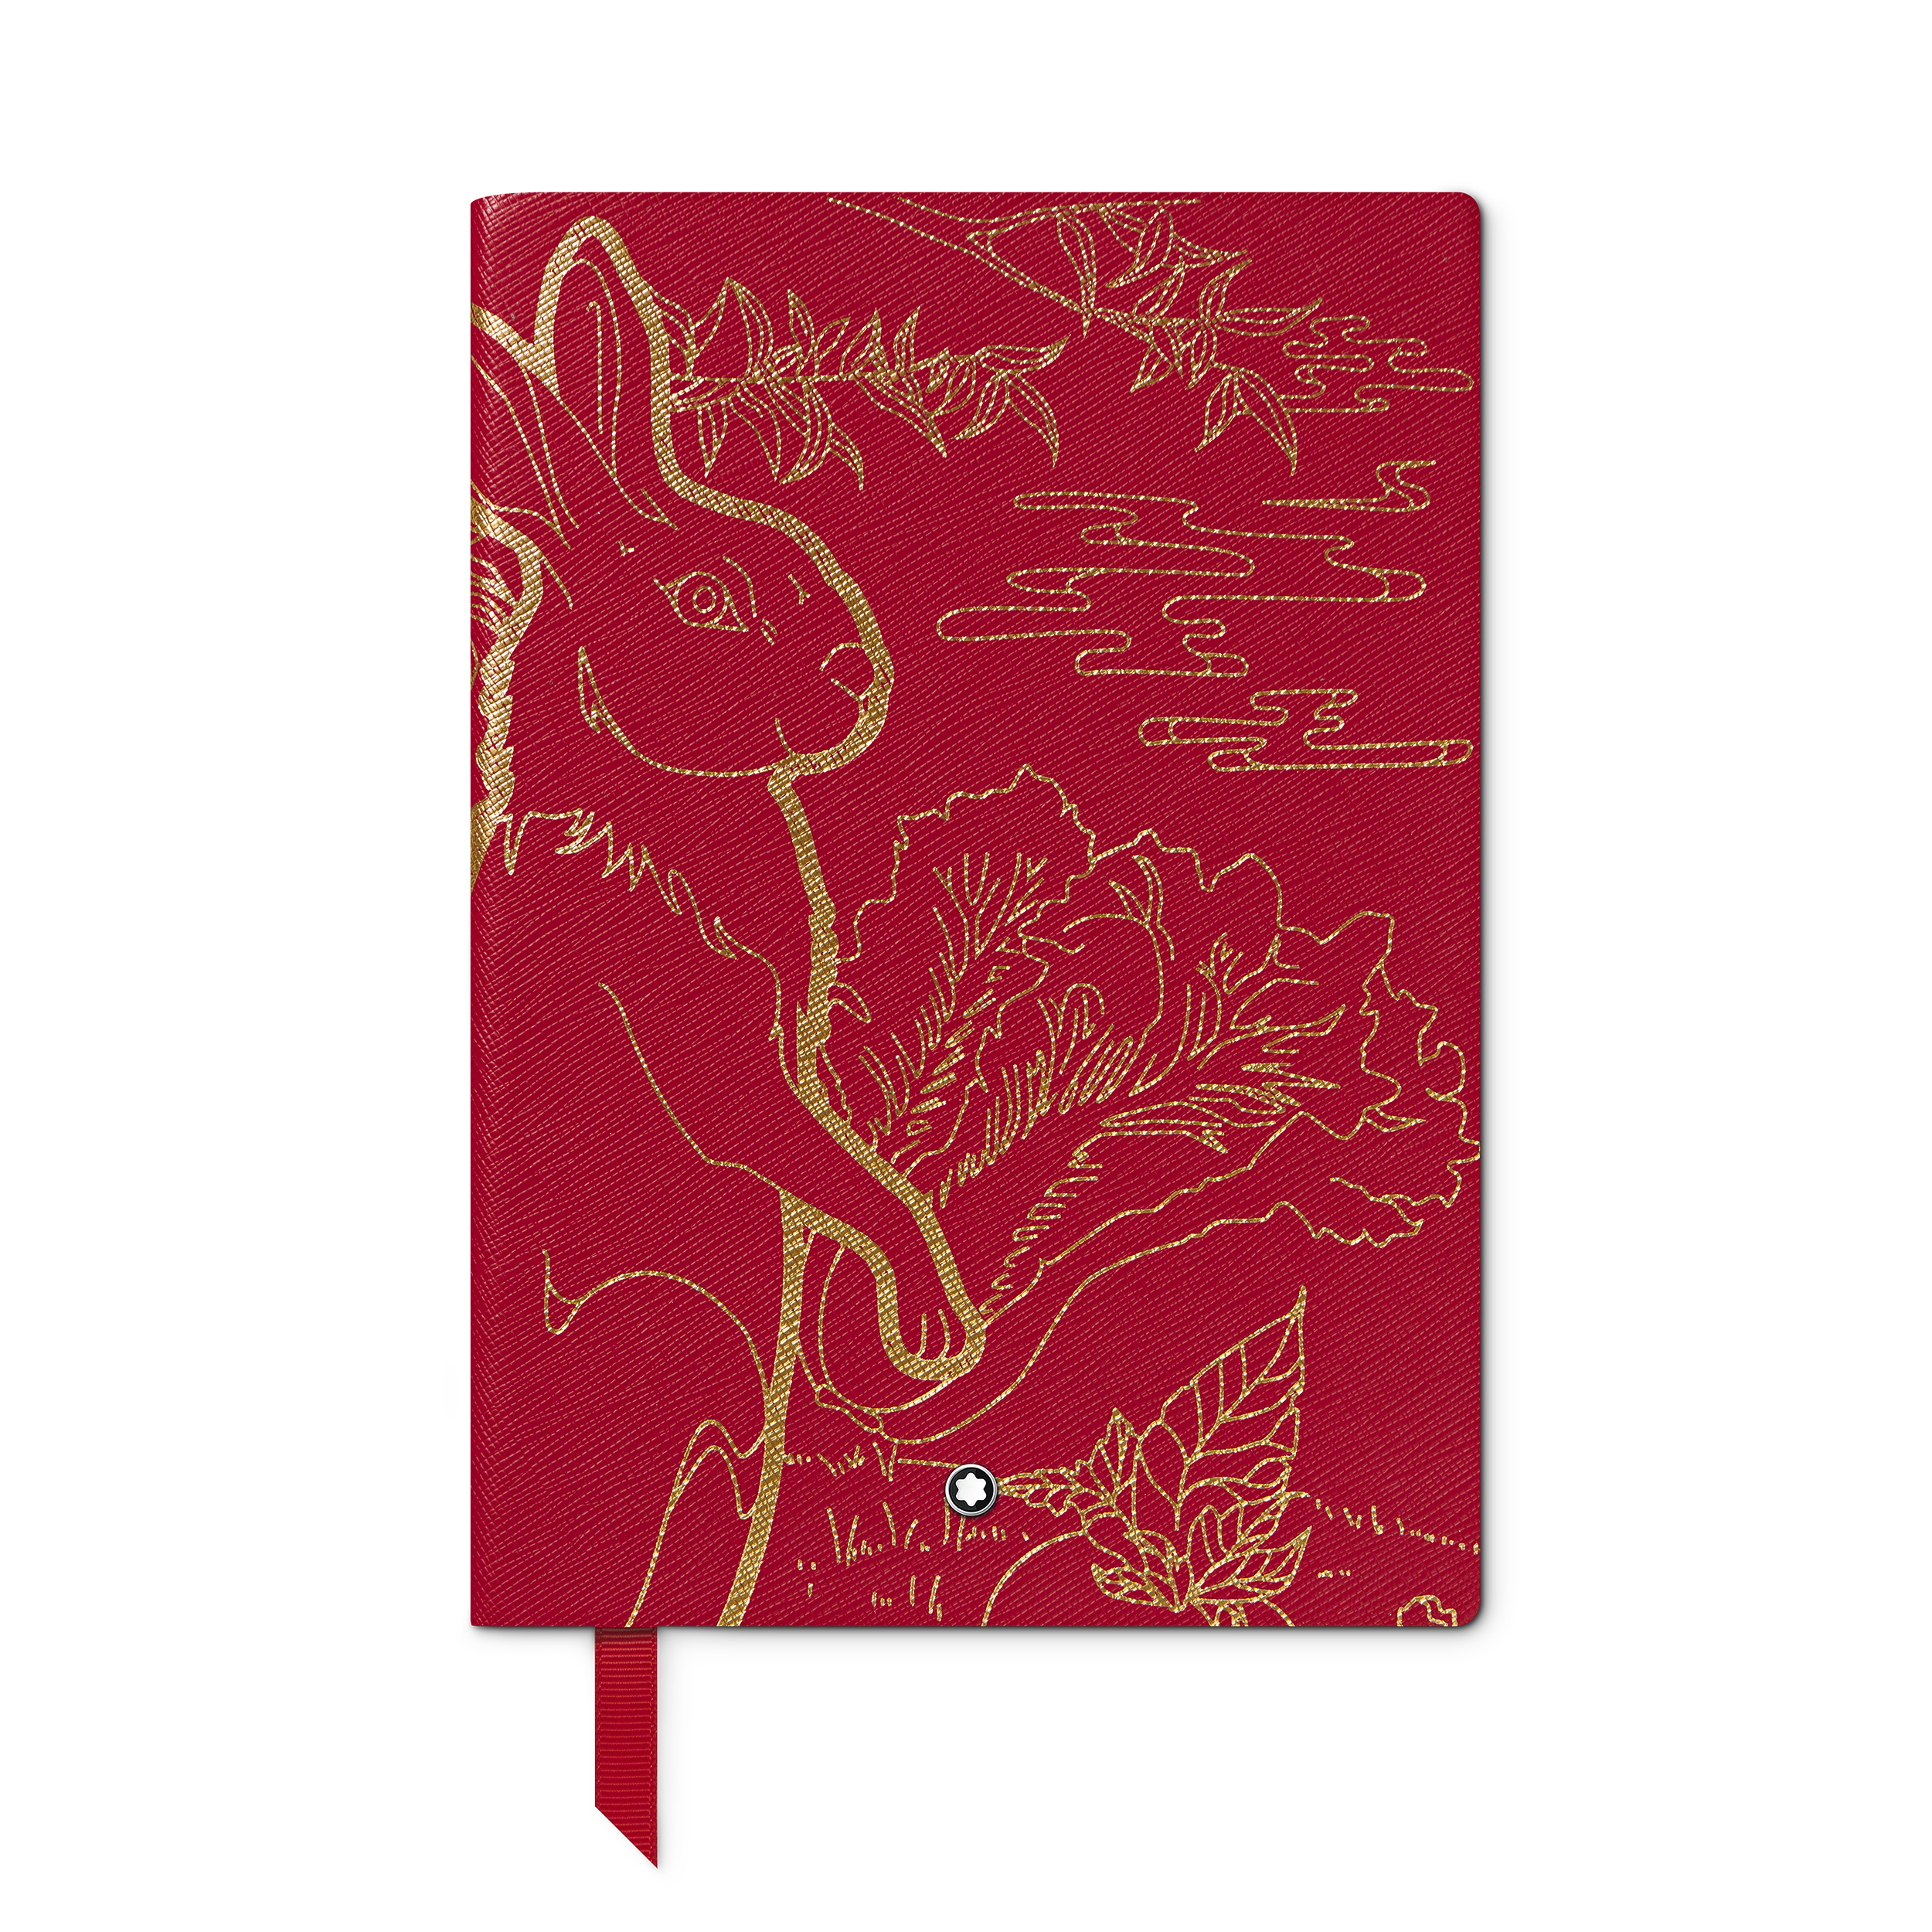 Notebook #146 small, The legend of Zodiac, Rabbit, red lined, image 1